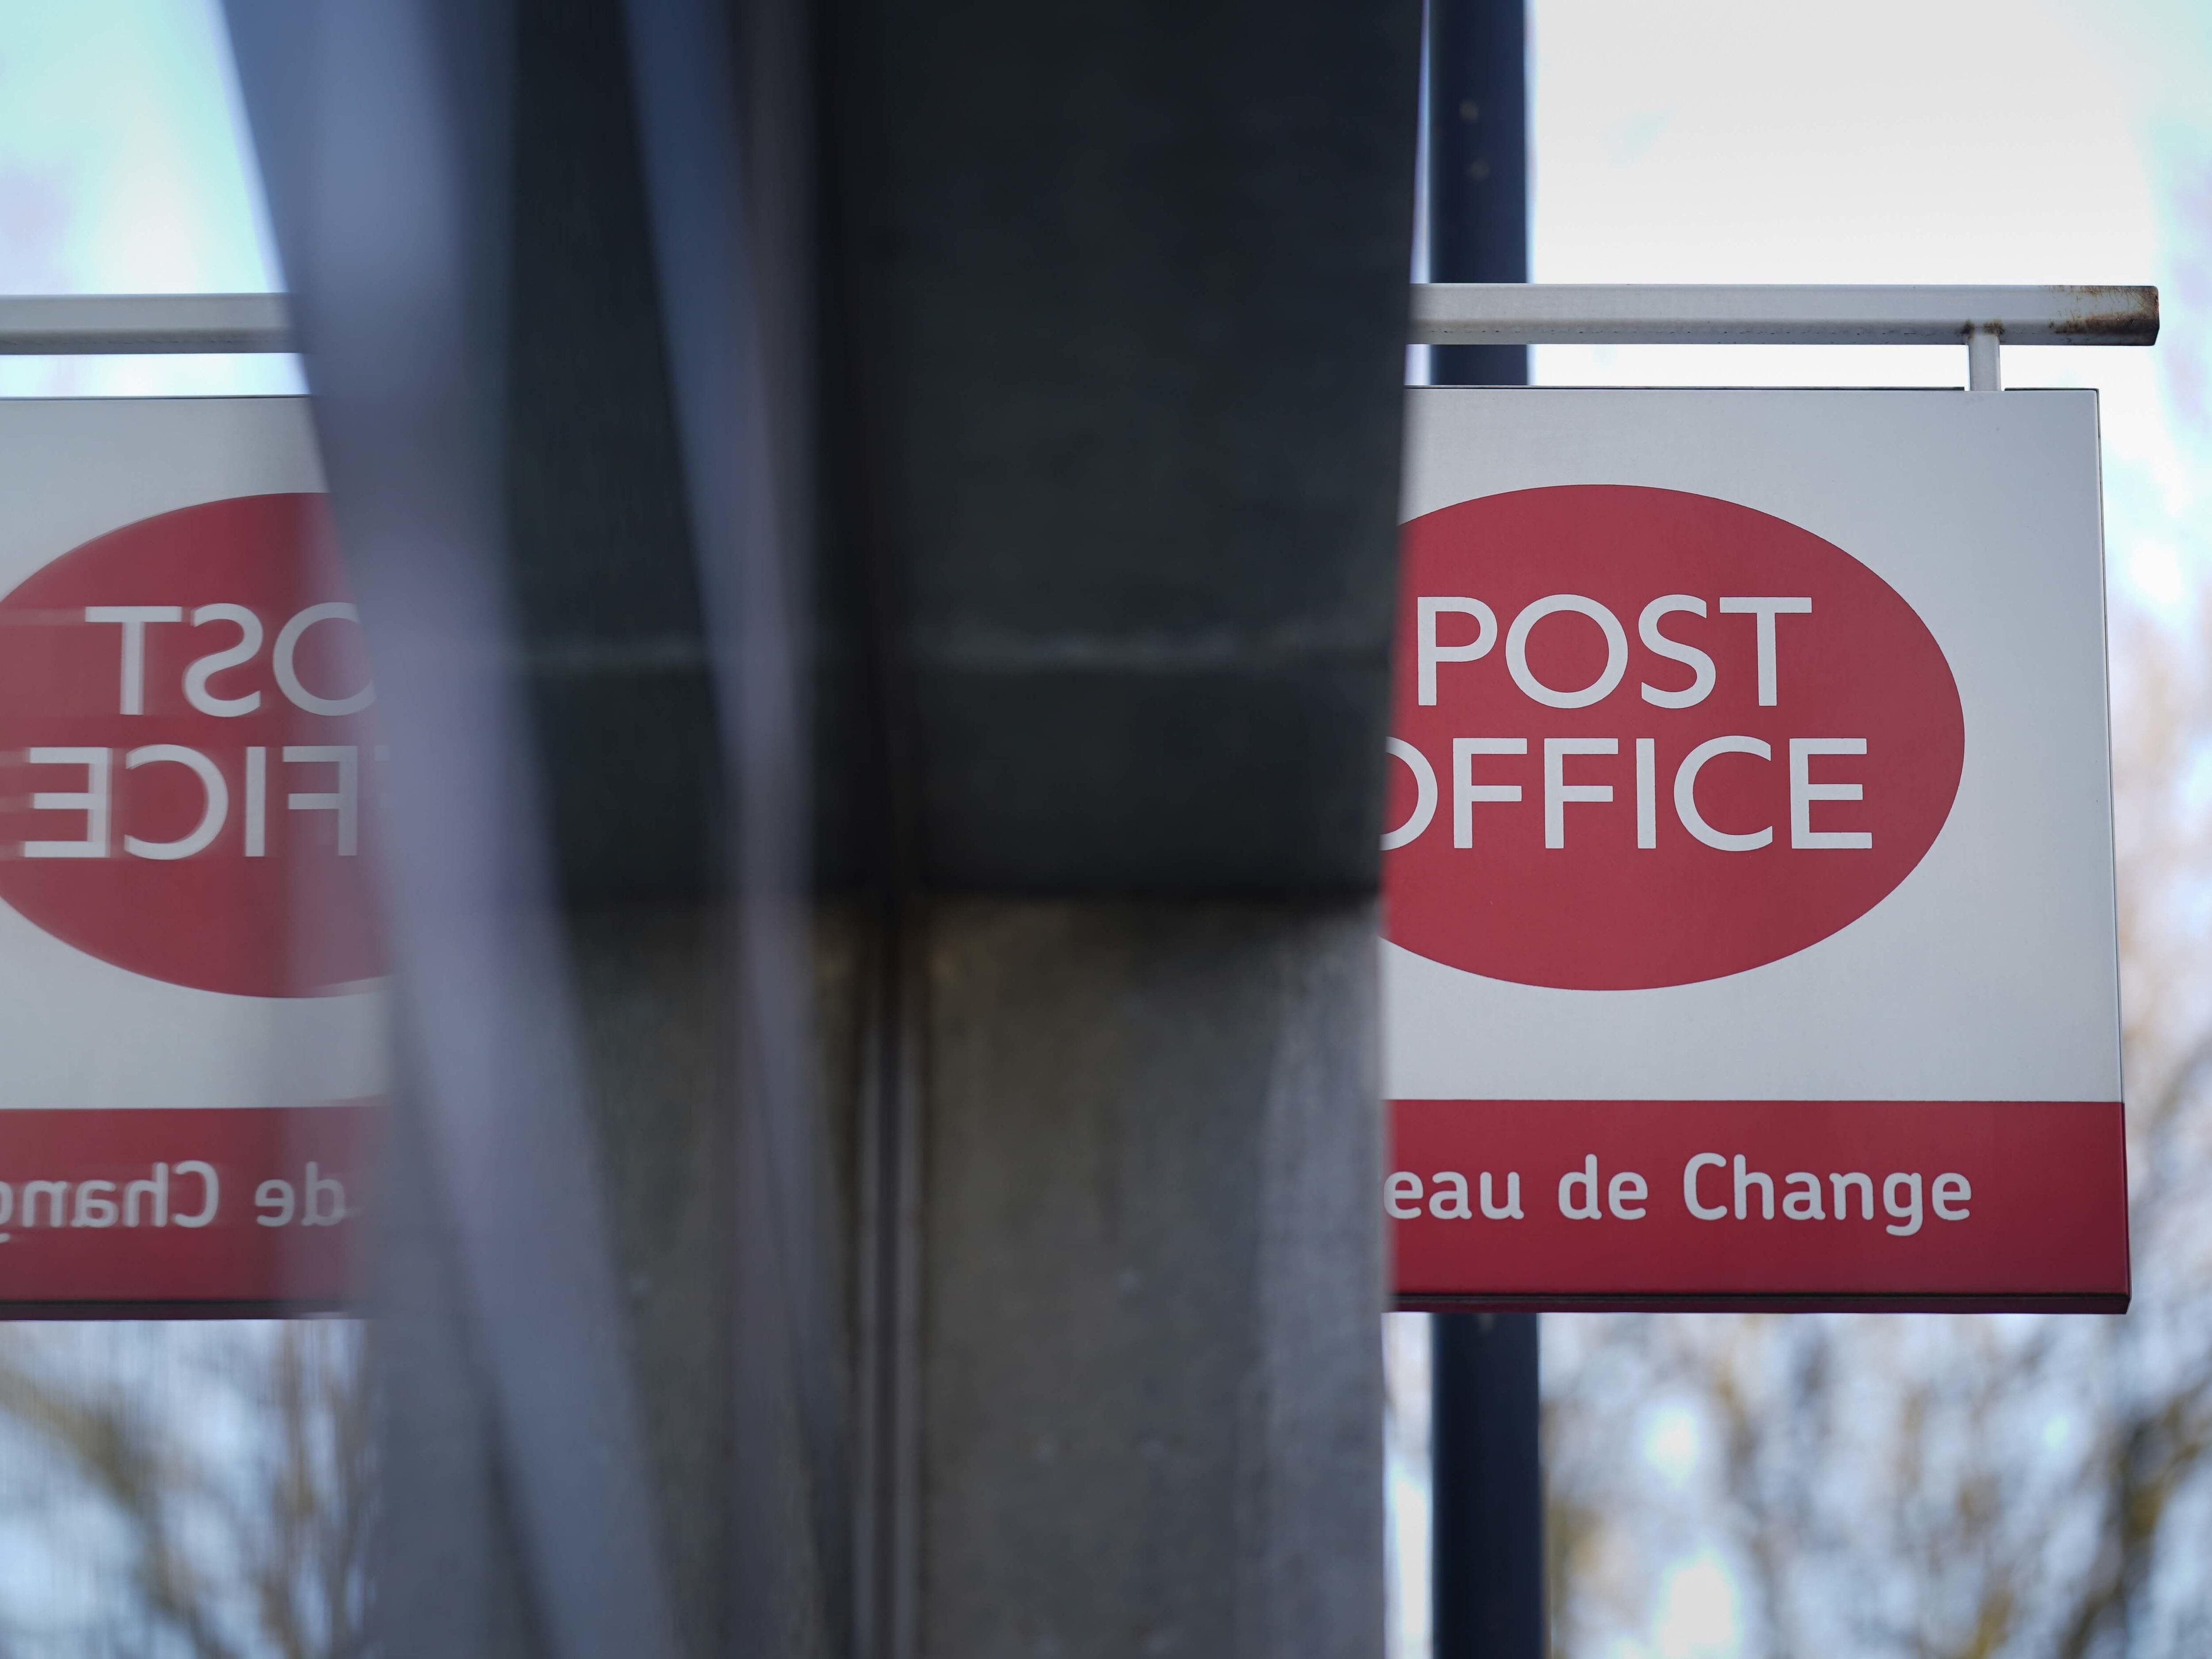 Post Office must reveal how much cash it ‘stole’ from subpostmasters, MPs told